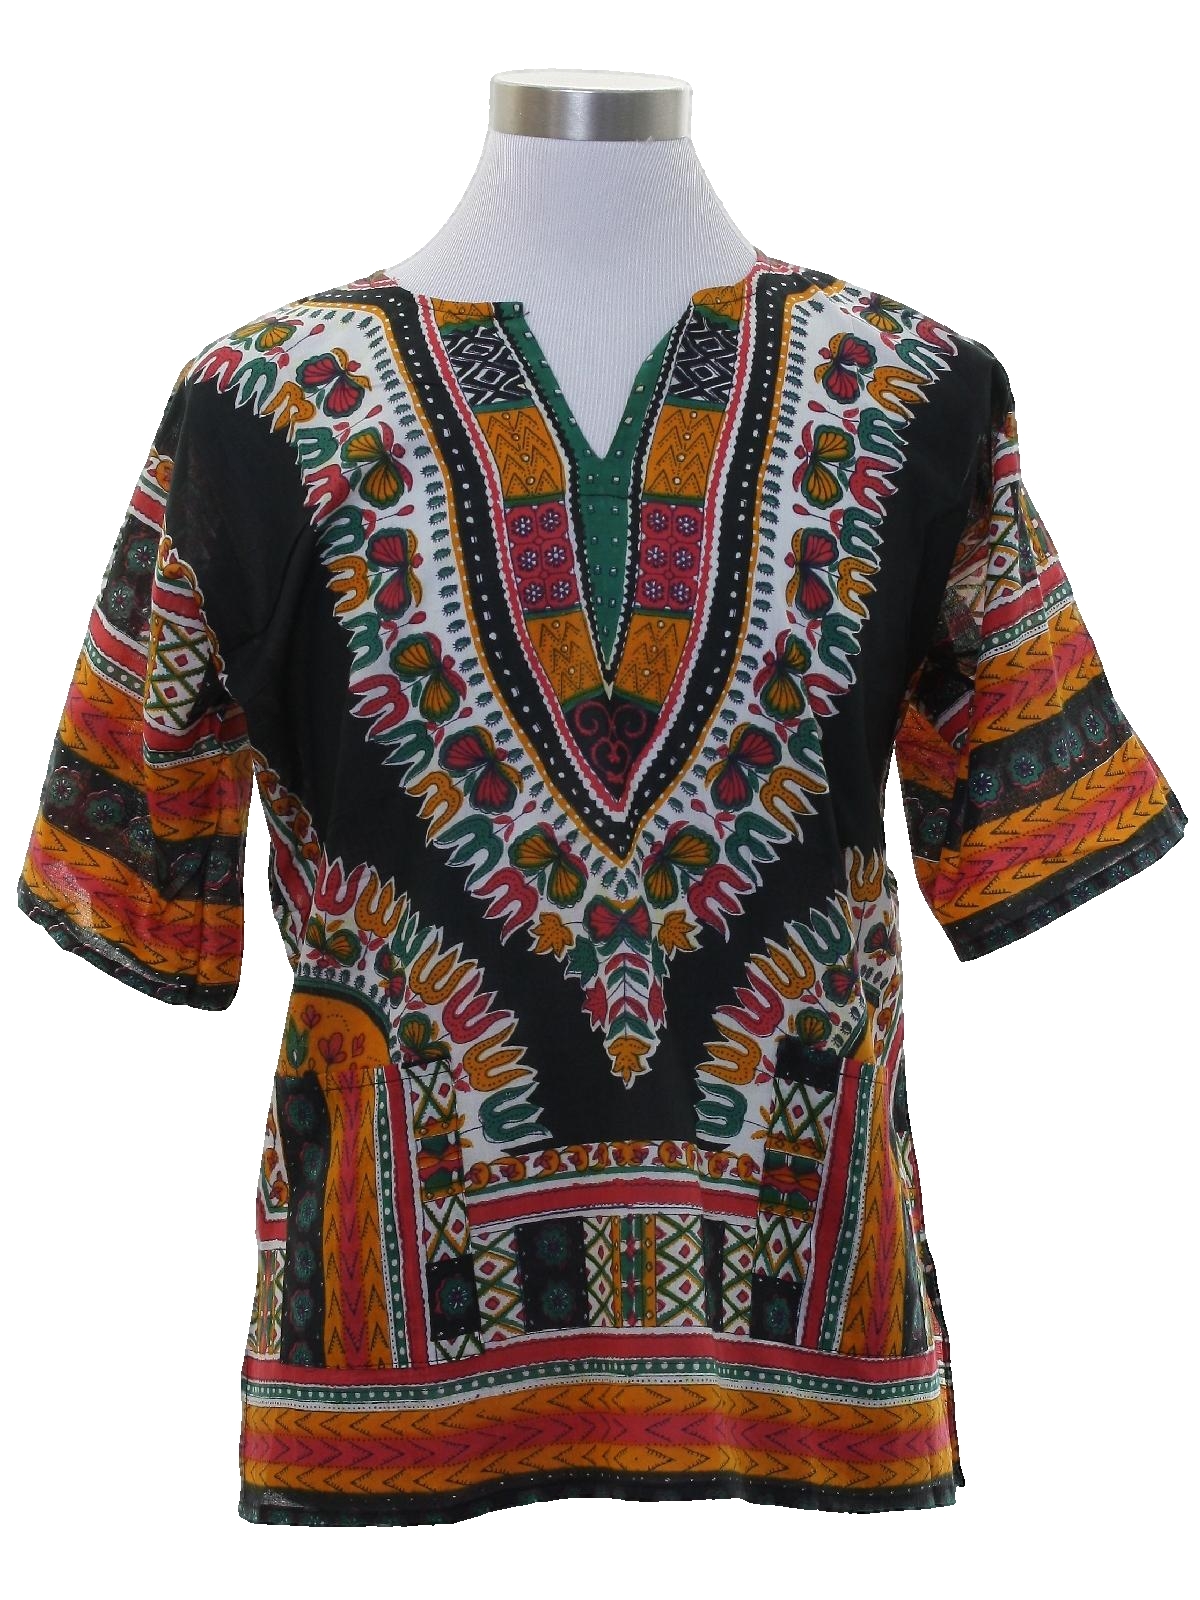 1970's Hippie Shirt: 70s style (made recently) -No Label- Unisex black